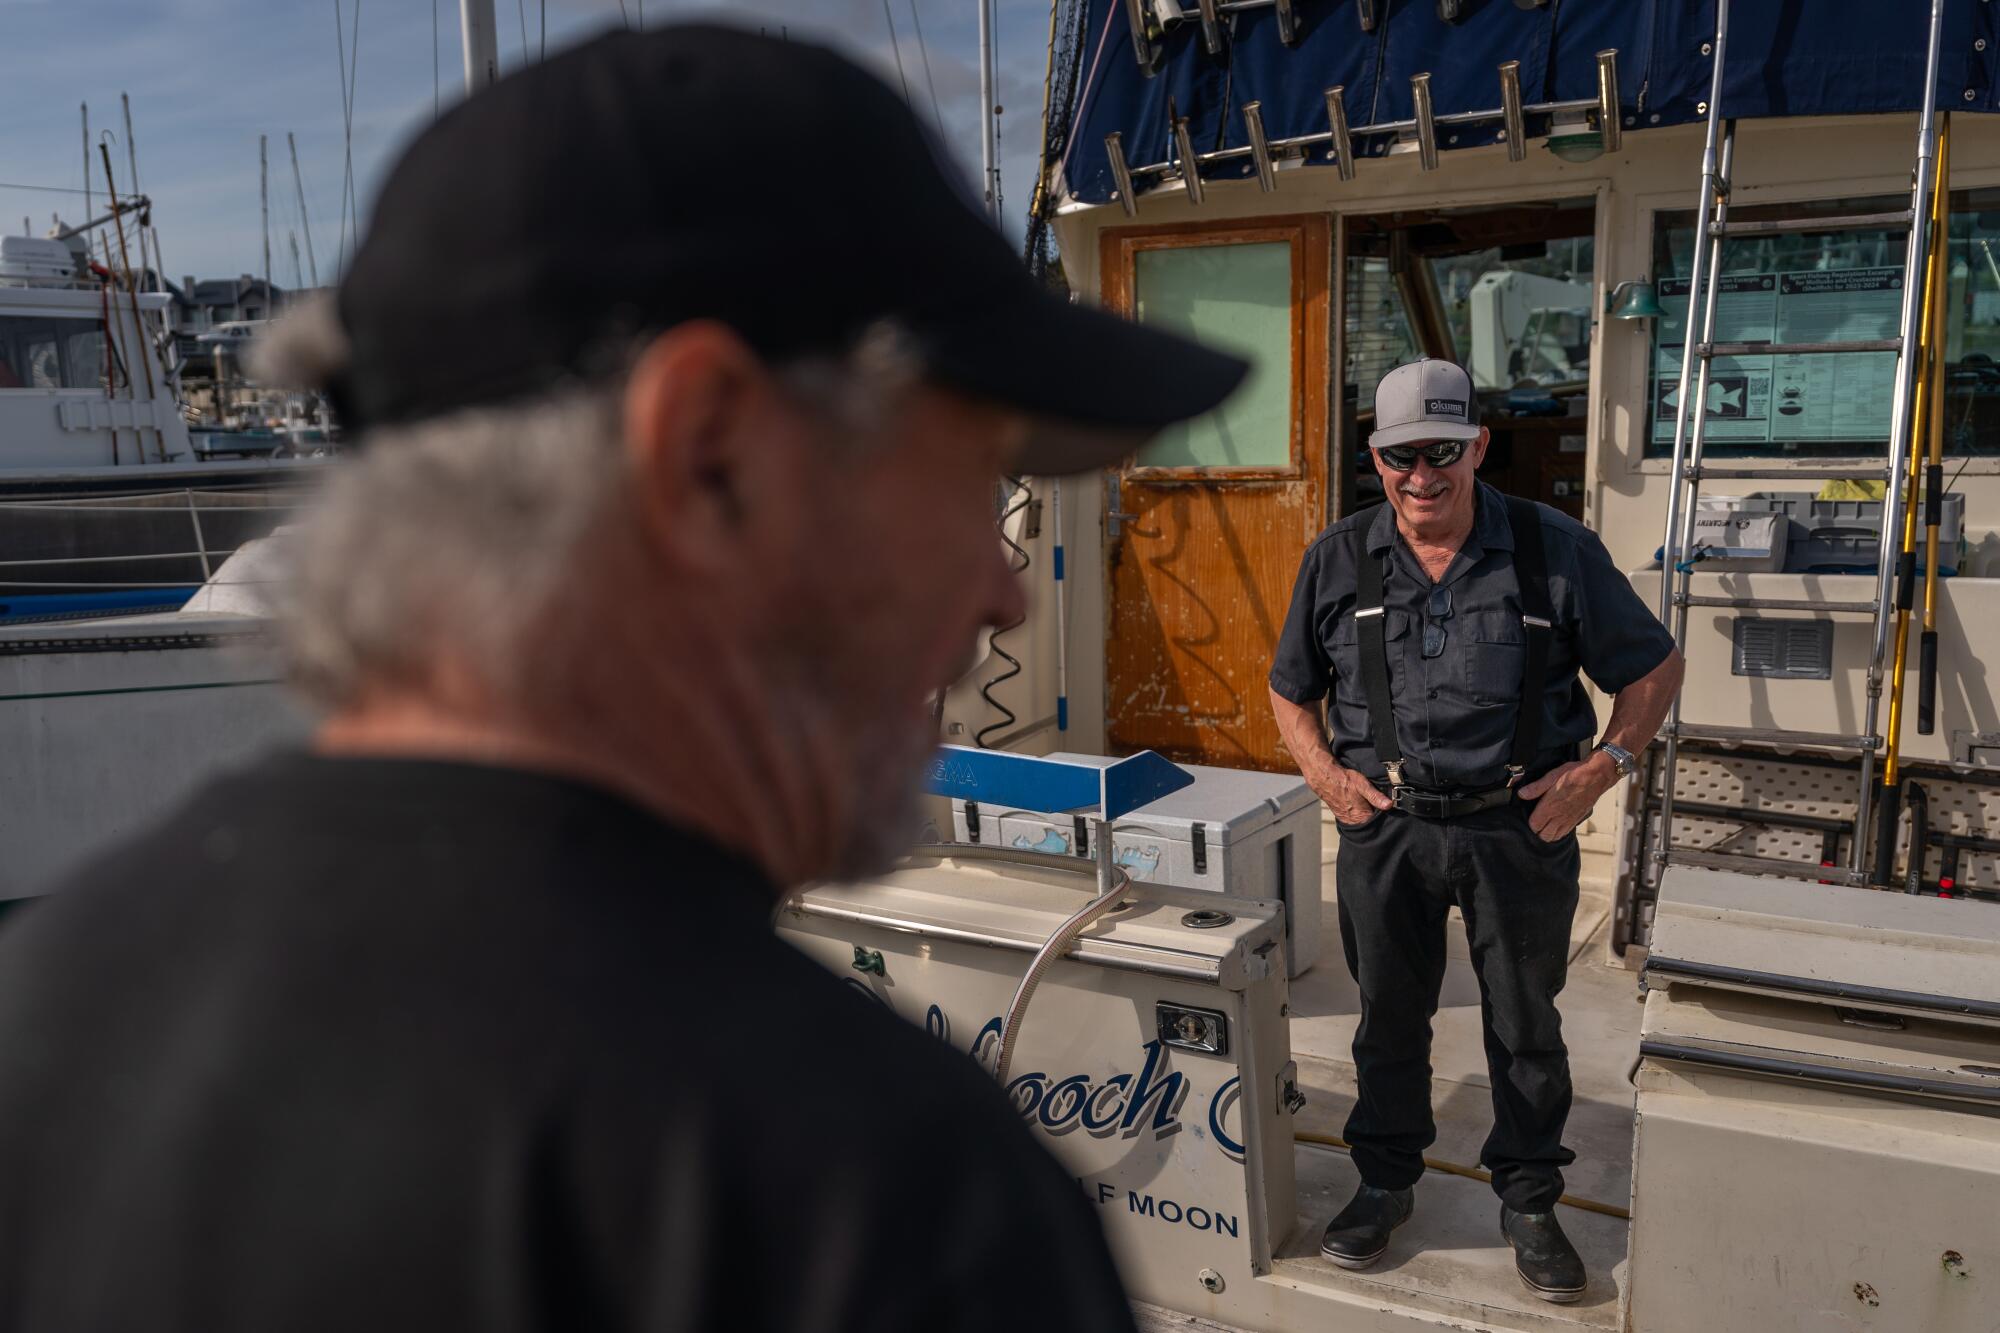 Duane Winter stands on his boat and chats with Chris Pedersen on the docks.